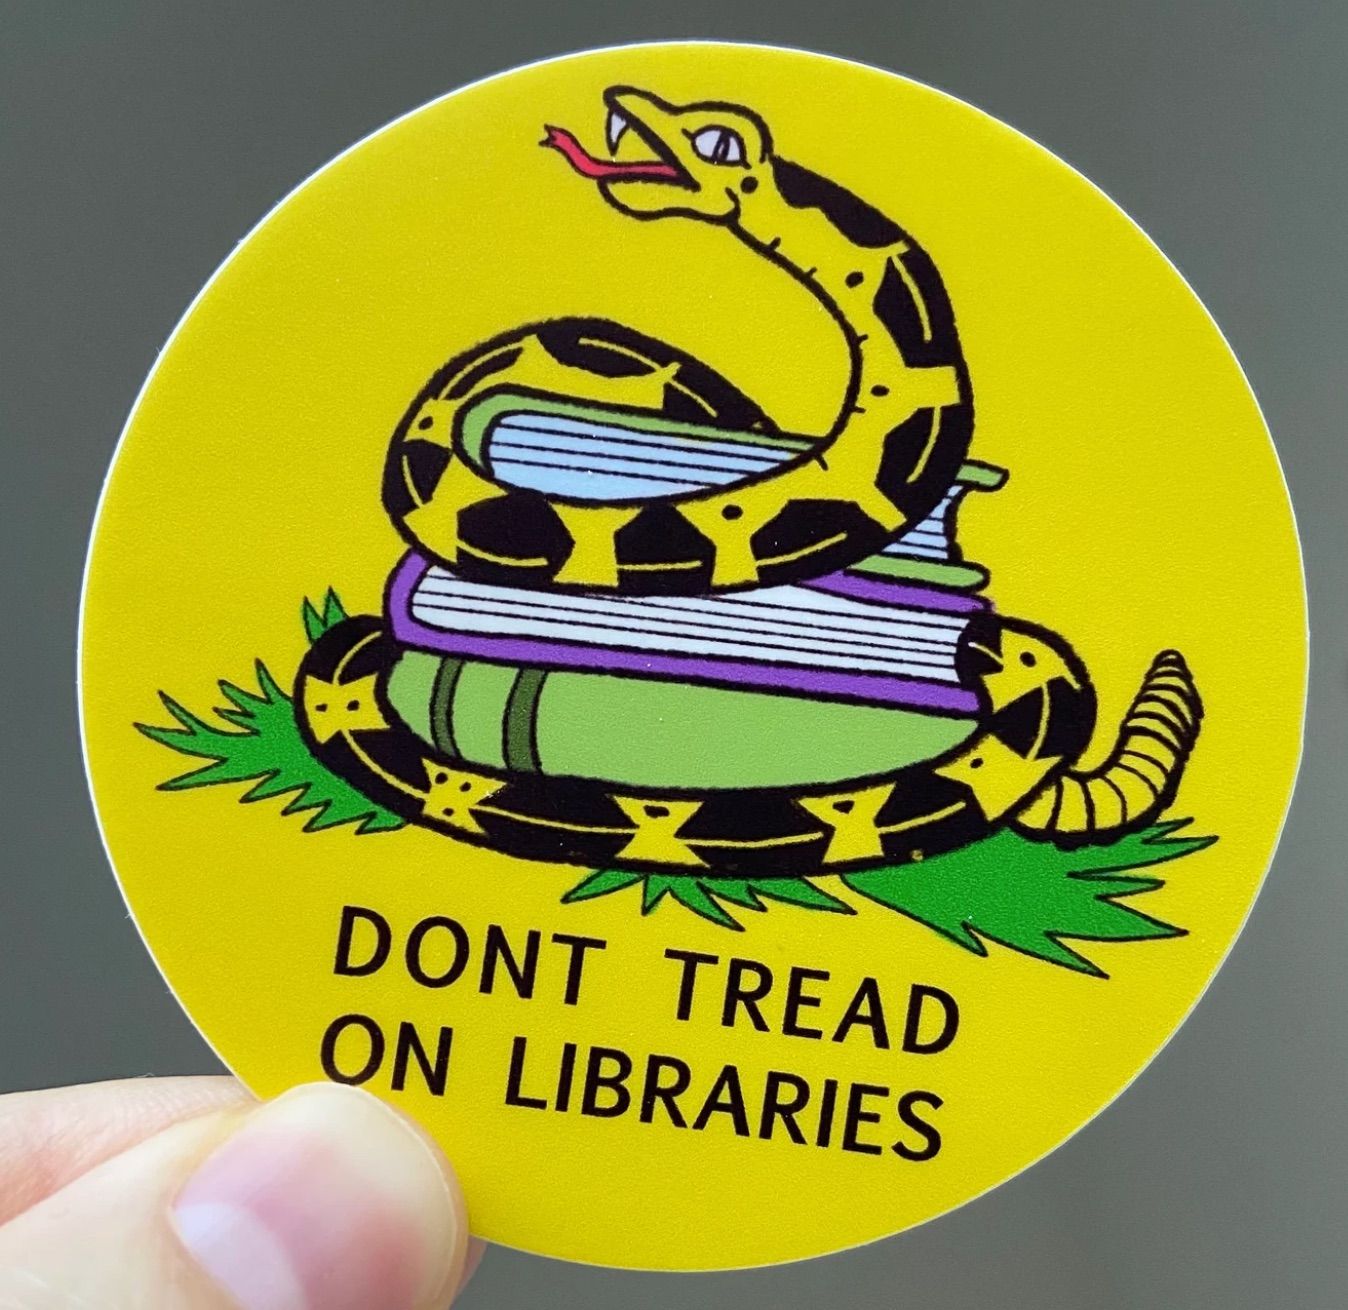 don't tread on me sticker with the text "don't tread on libraries."